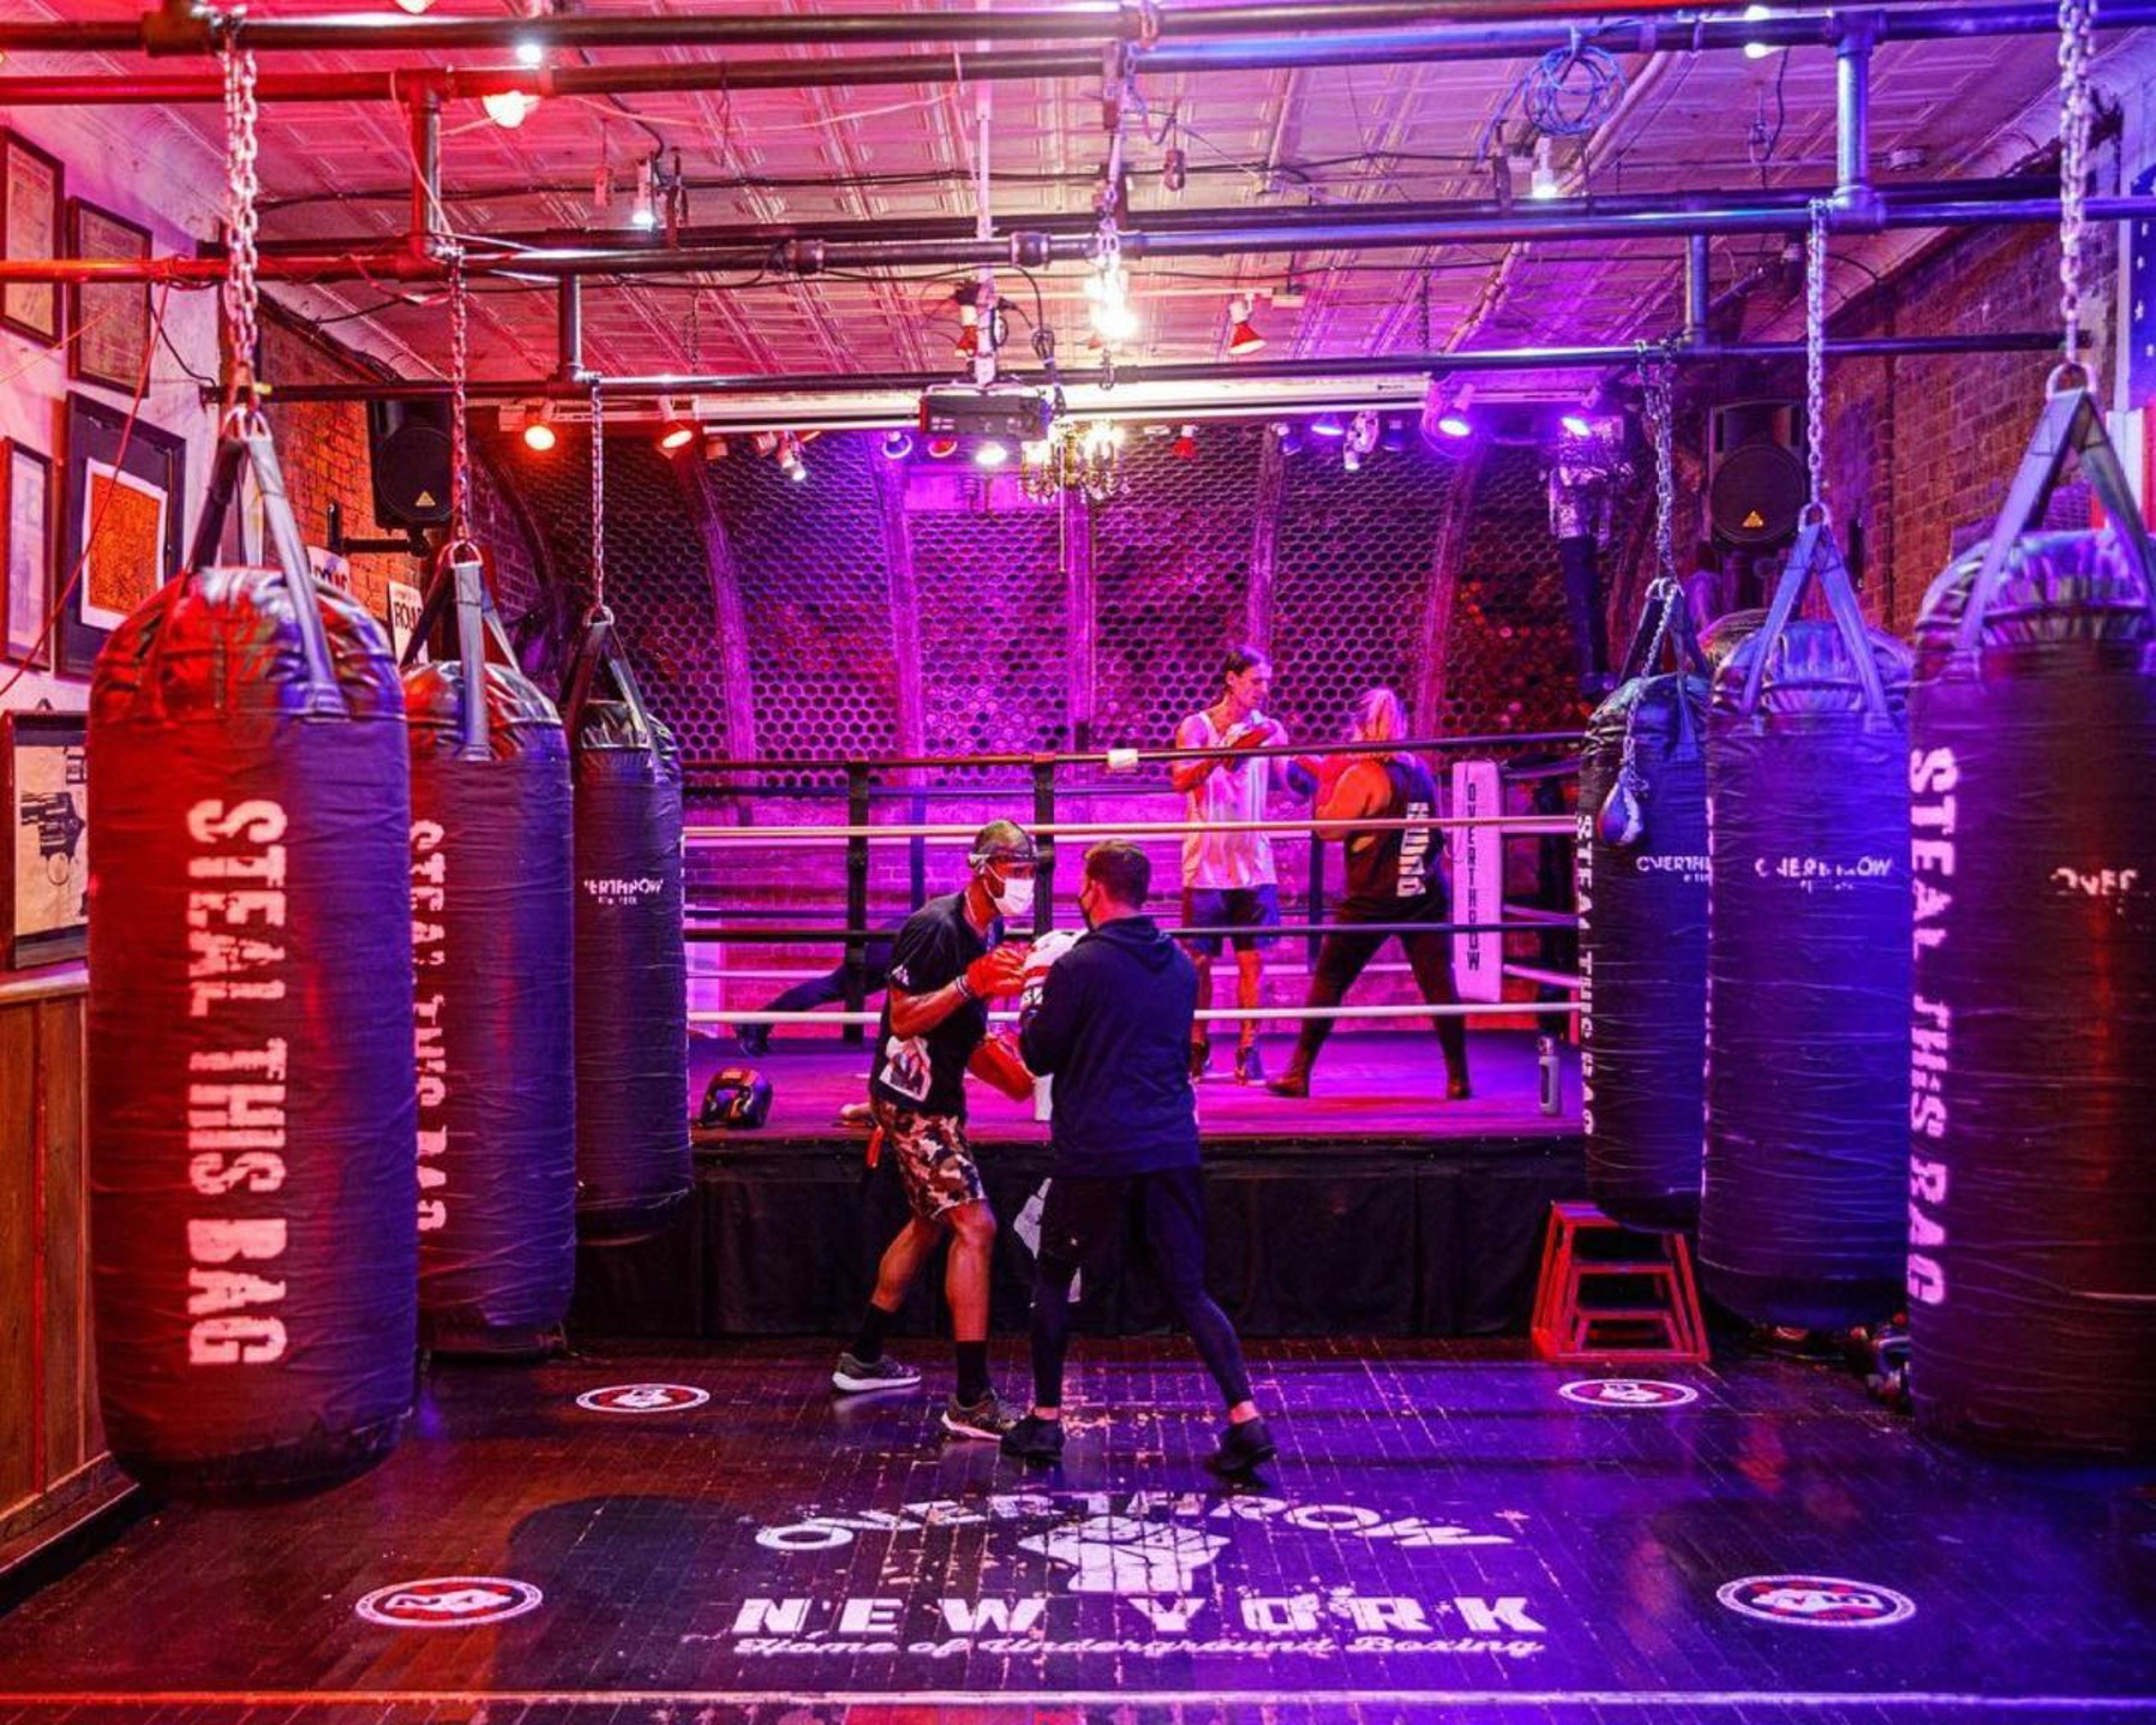 Overthrow Boxing Club